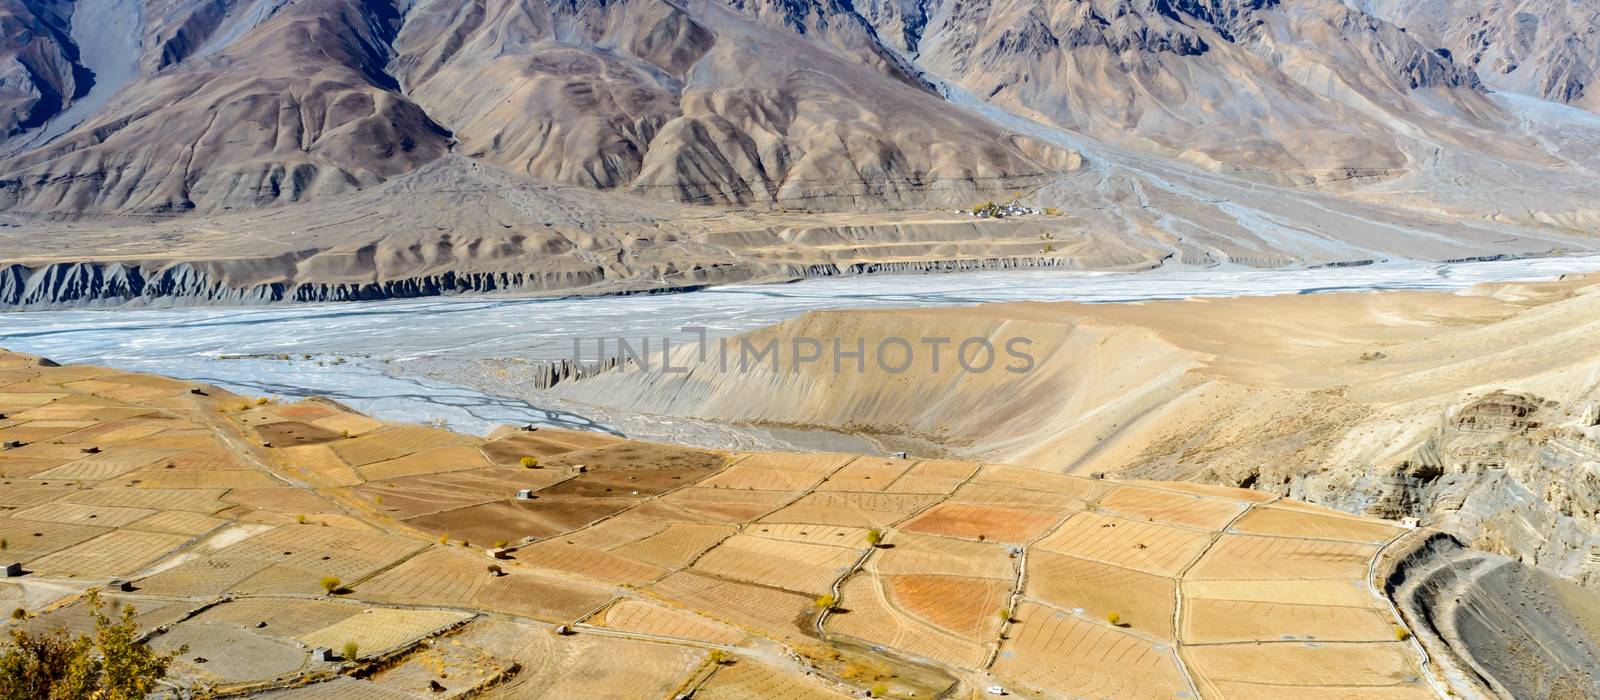 Barren Landscape panorama. Rice Terraces Cultivation field and agricultural farm land deep slope of Himalaya mountain Valley. Spiti river in background. Kaza town, Himachal Pradesh Hill State India. Aerial view